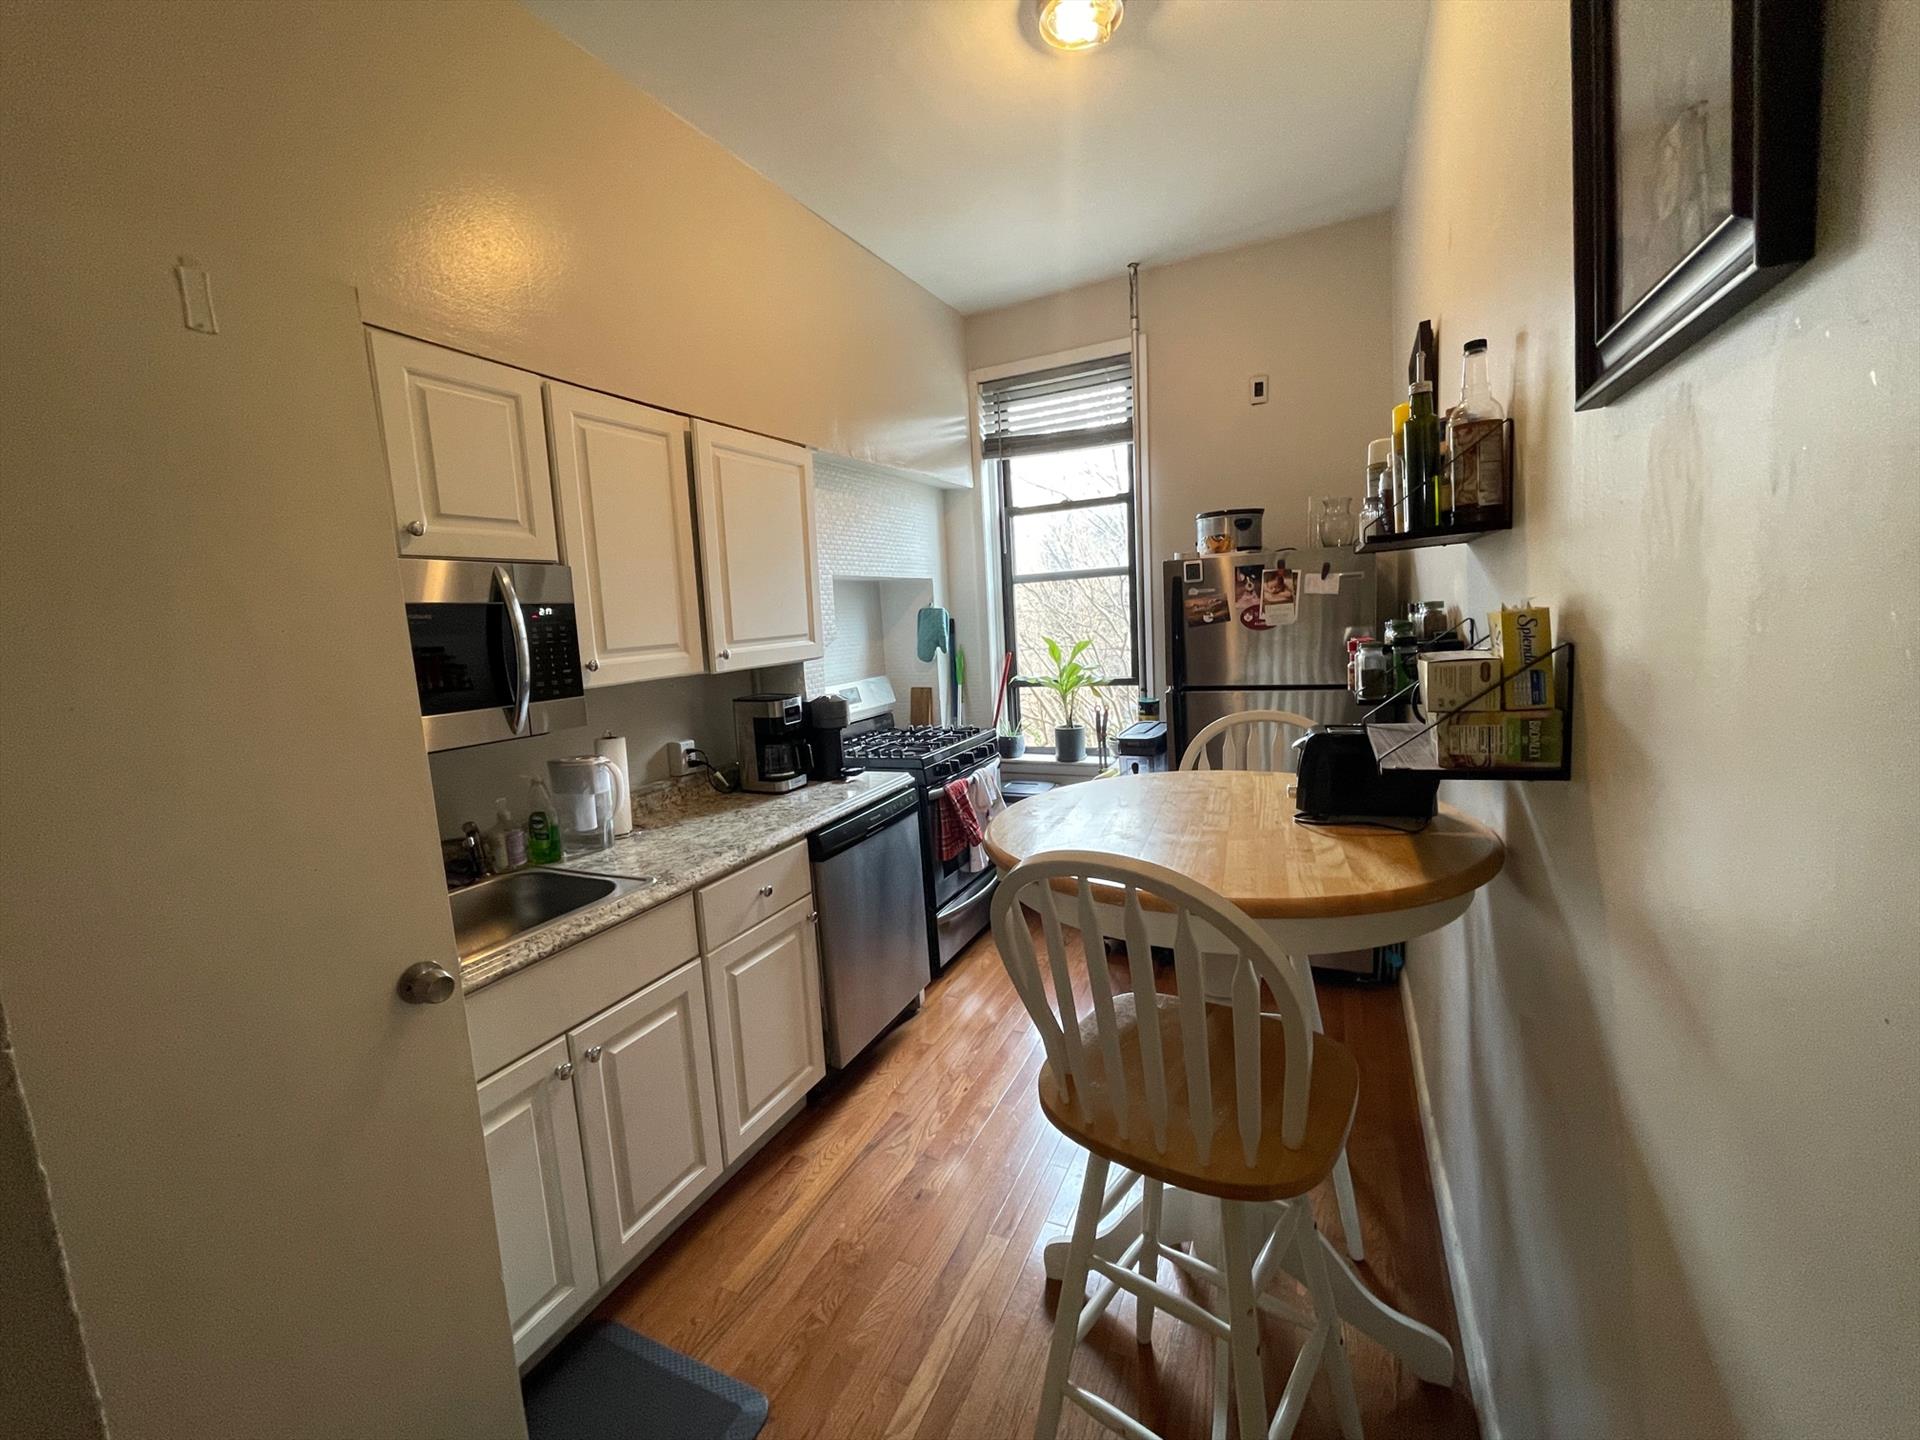 Great layout 4 bed 1 bath apartment with laundry in the unit!! Unit was renovated a few years ago w/ stainless steel appliances and hardwood floors. Available June 1st. Broker fee is 10% of annual rent. 